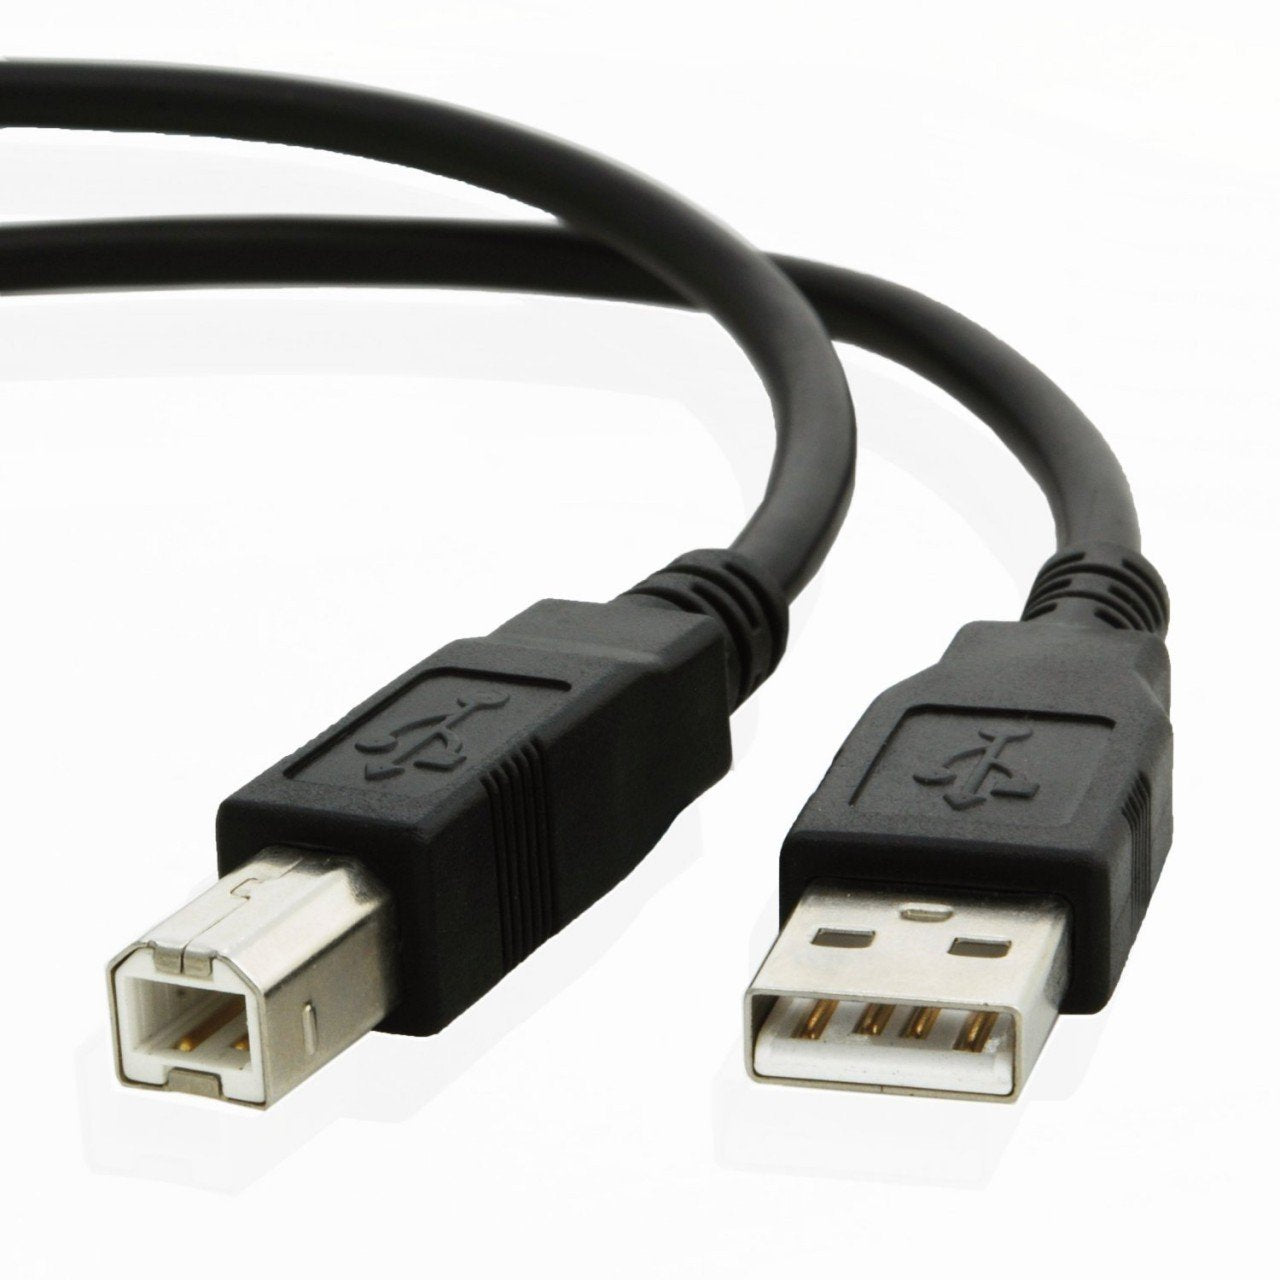 USB cable for Canon PIXMA MG3250